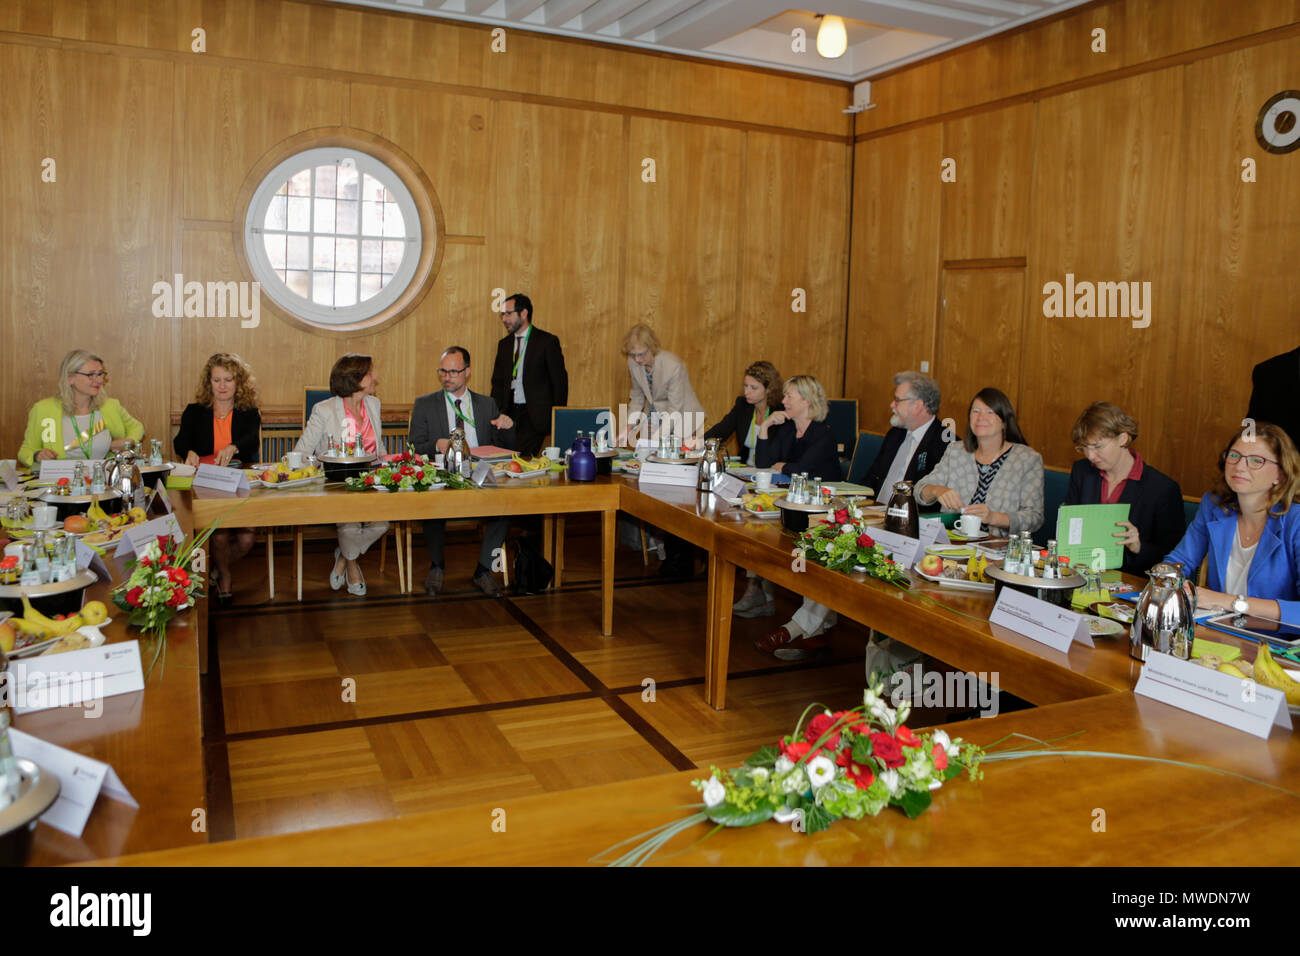 Worms, Germany. 1st June 2018. The Rhineland-Palatinate Minister‐President Malu Dreyer is pictured with ministers and secretaries of state from her cabinet ahead of the cabinet meeting. The Rhineland-Palatine cabinet of Minister‐President Malu Dreyer met in the City Hall in Worms, ahead of the opening of the Rheinland-Pfalz-Tag 2018. Malu Dreyer and her cabinet signed the Golden Book of the city of Worms after the meeting. Around 300.000 visitors are expected in the 34. . Credit: Michael Debets/Alamy Live News Stock Photo